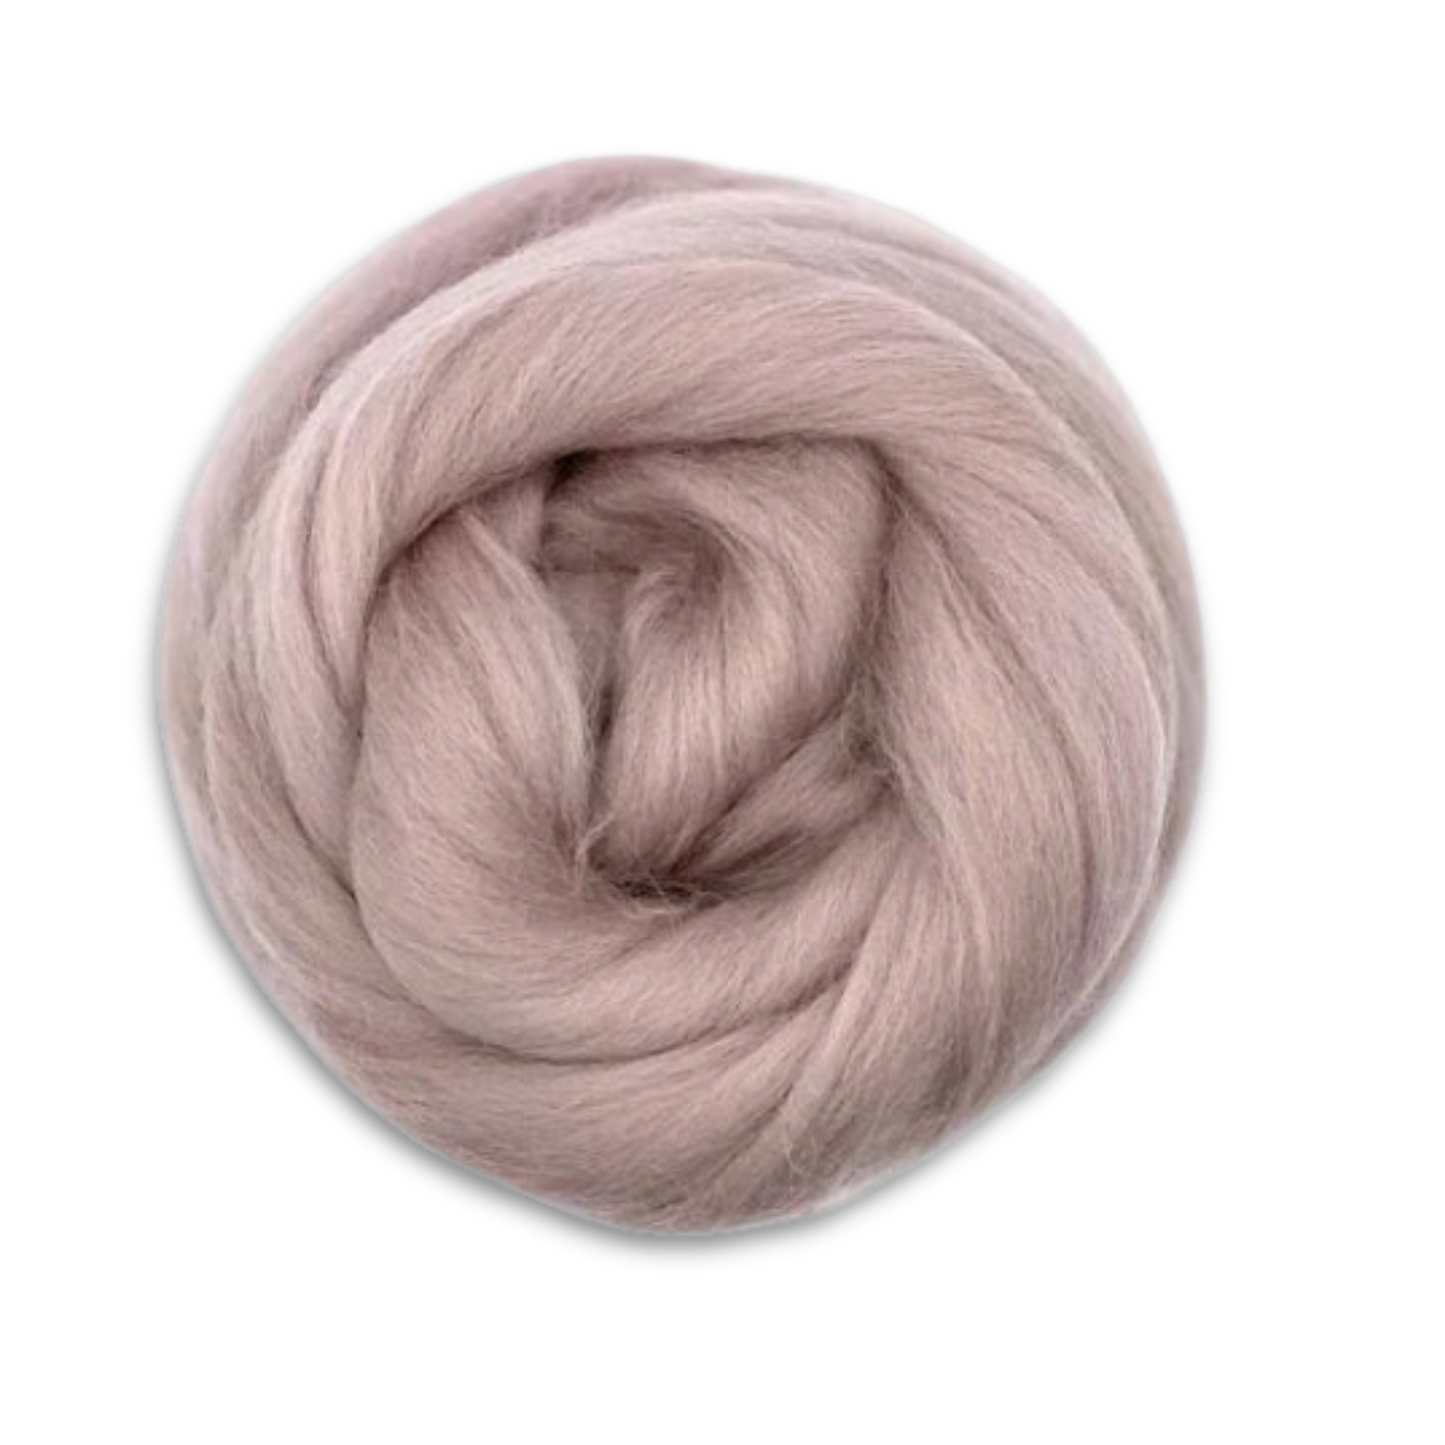 Dyed Corriedale Wool Combed Top | 8 Ounce Bundles